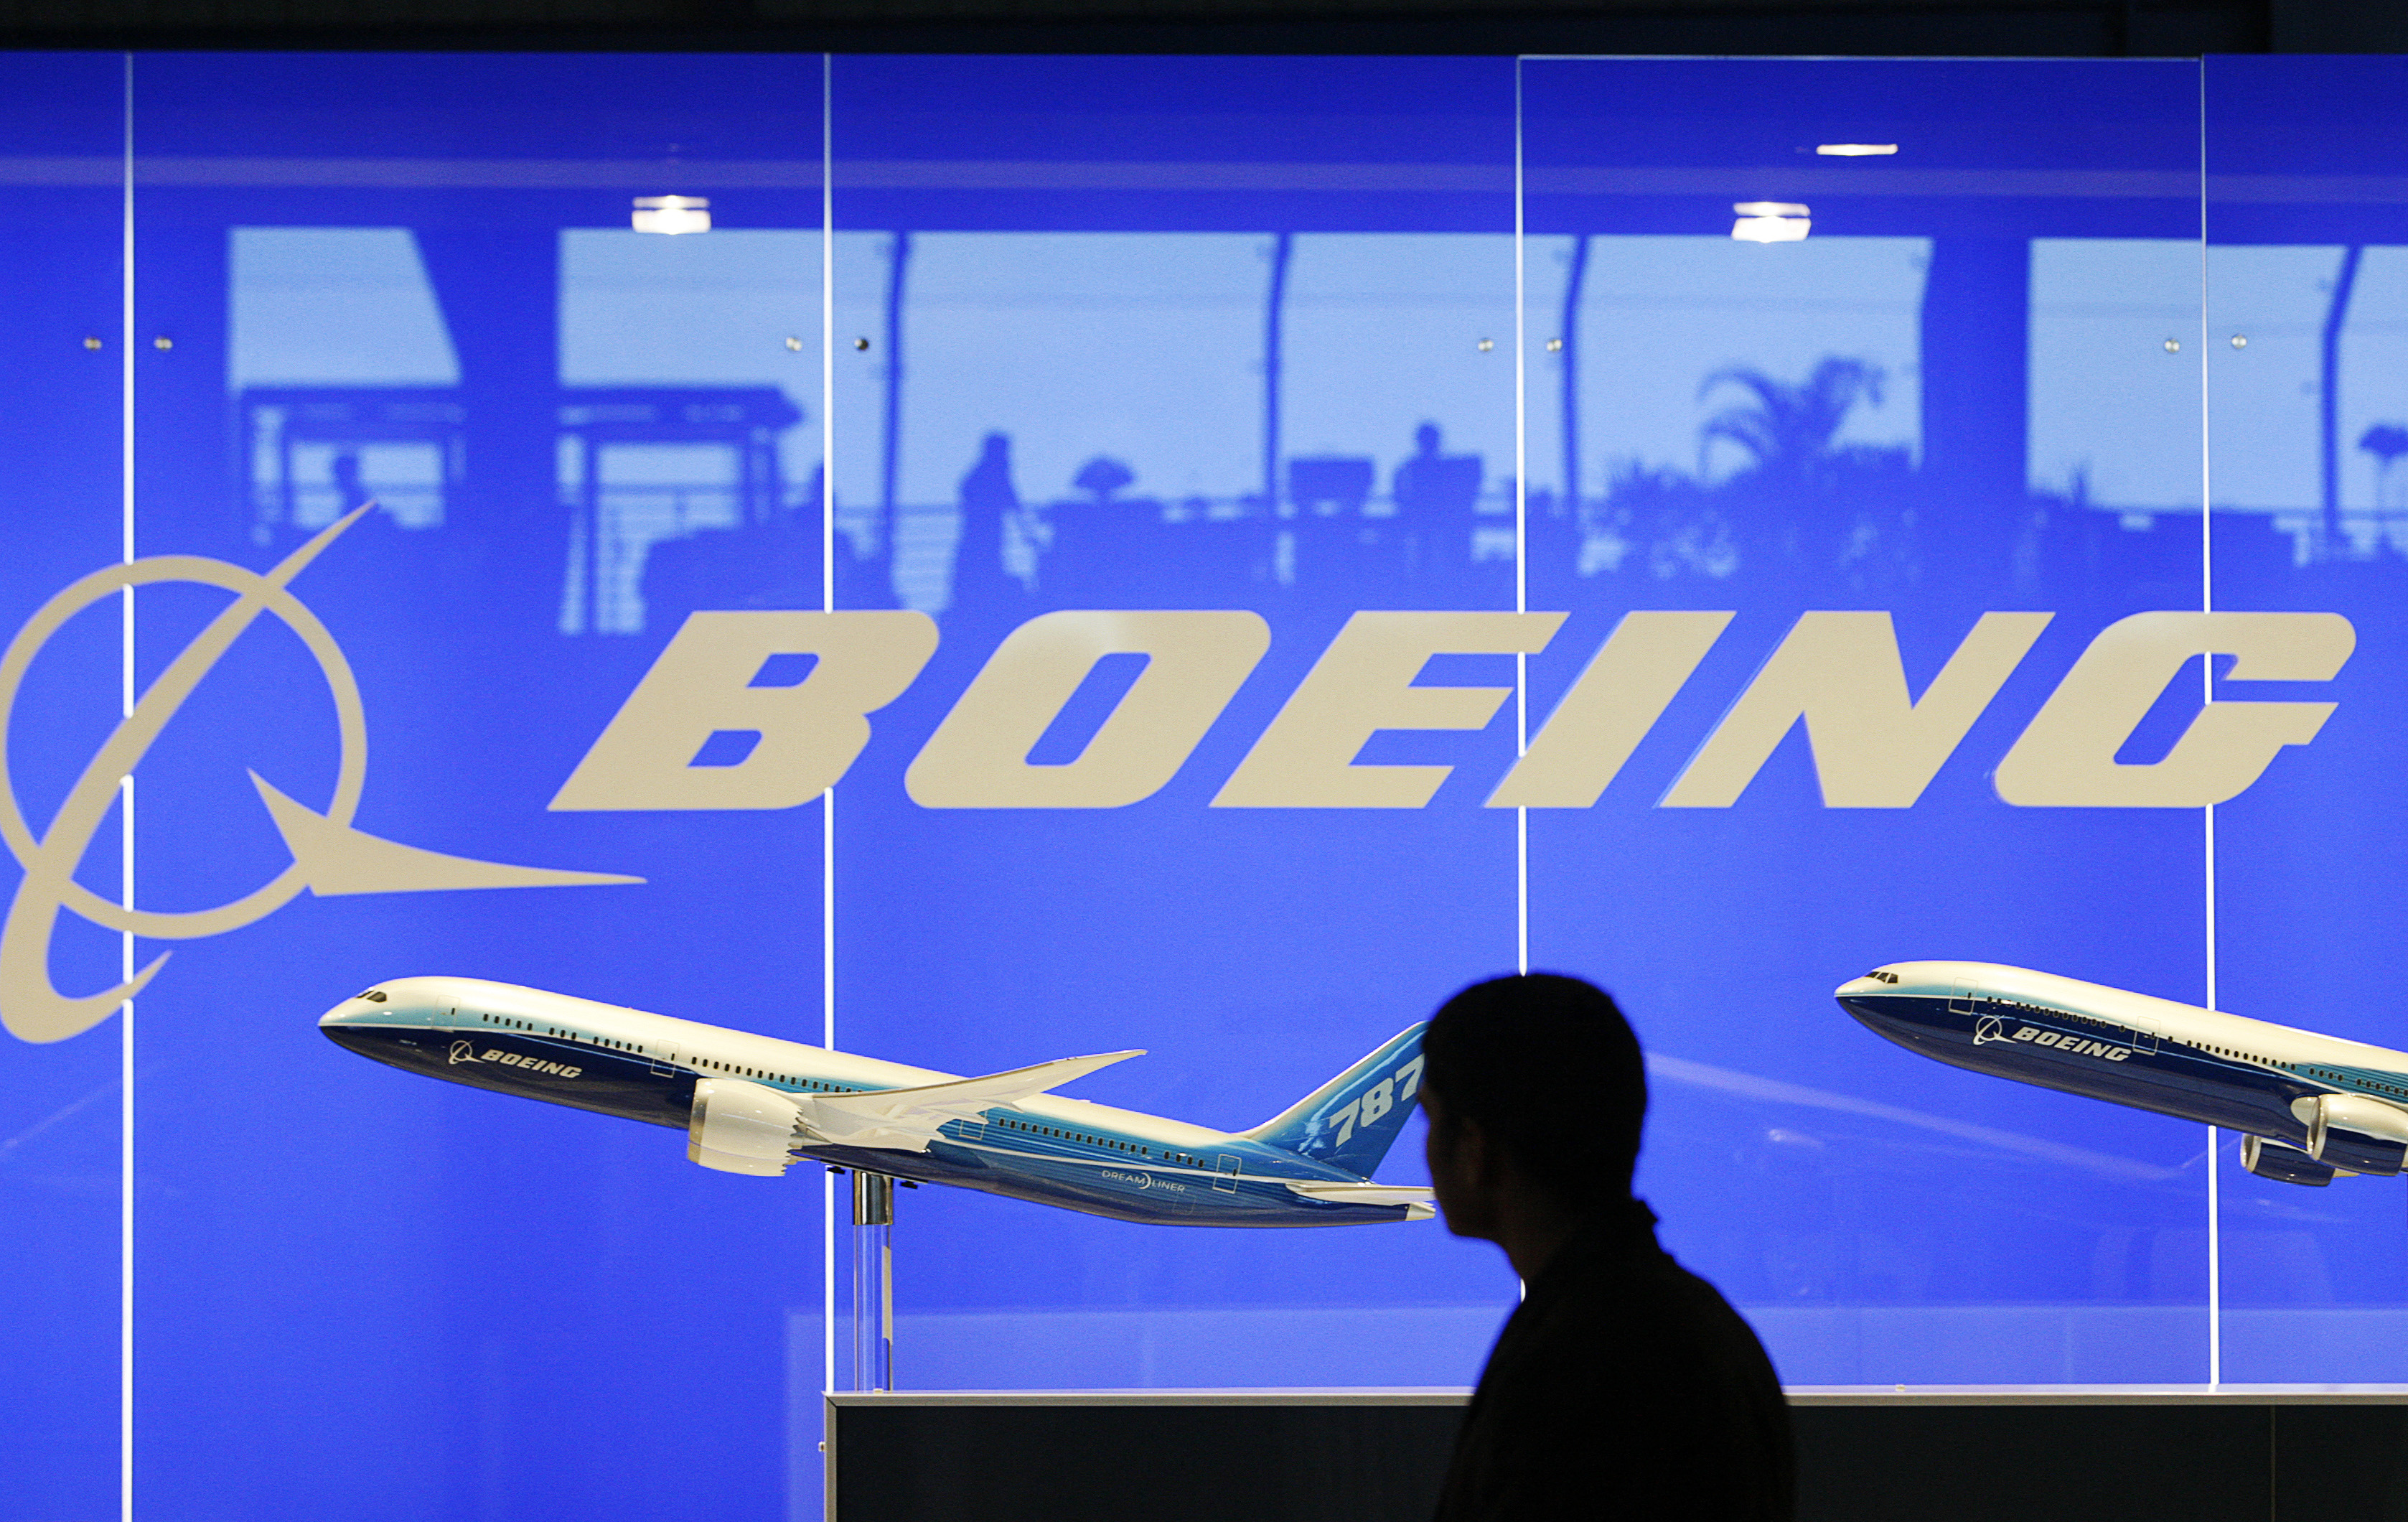 A man looks at a scale model of Boeing's 787 dreamliner at their booth at the Singapore Air Show in Singapore